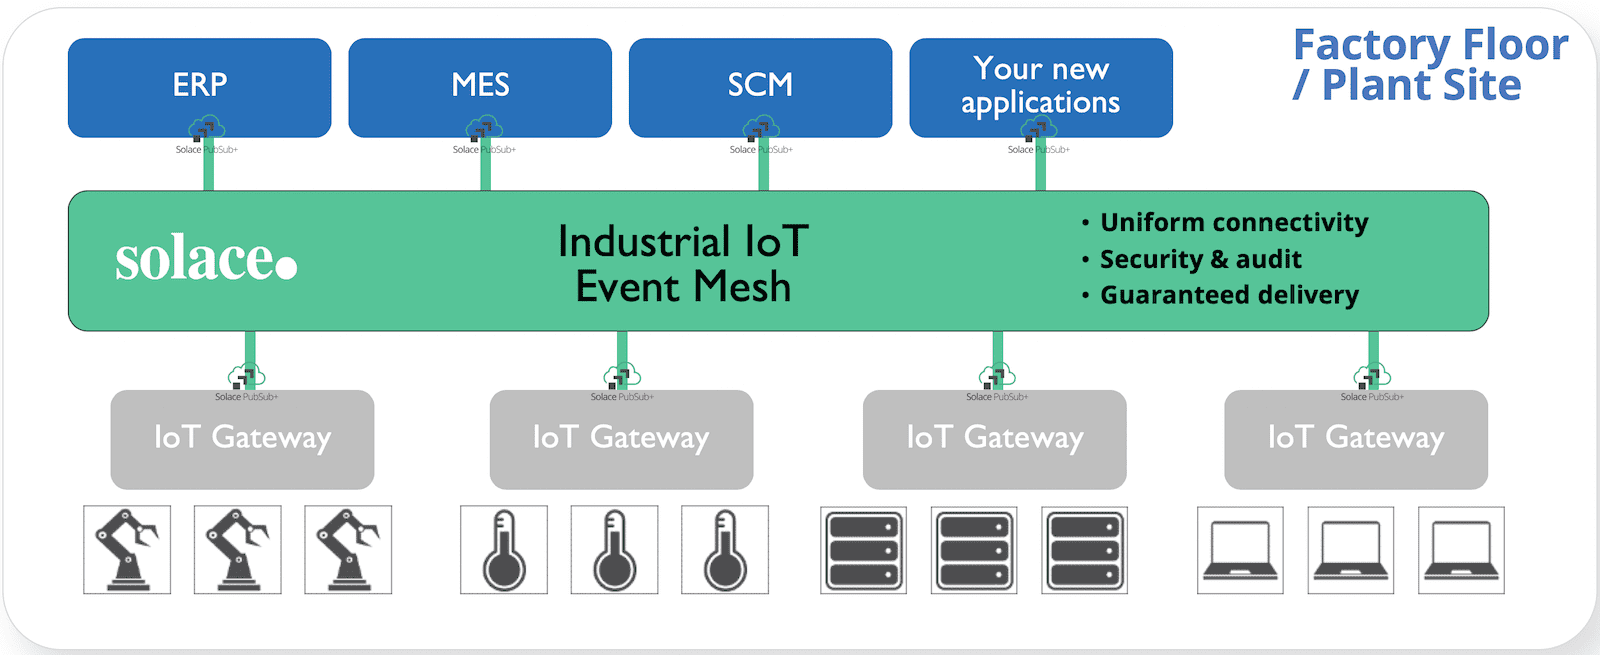 A diagram depicting an Industrial IoT event mesh